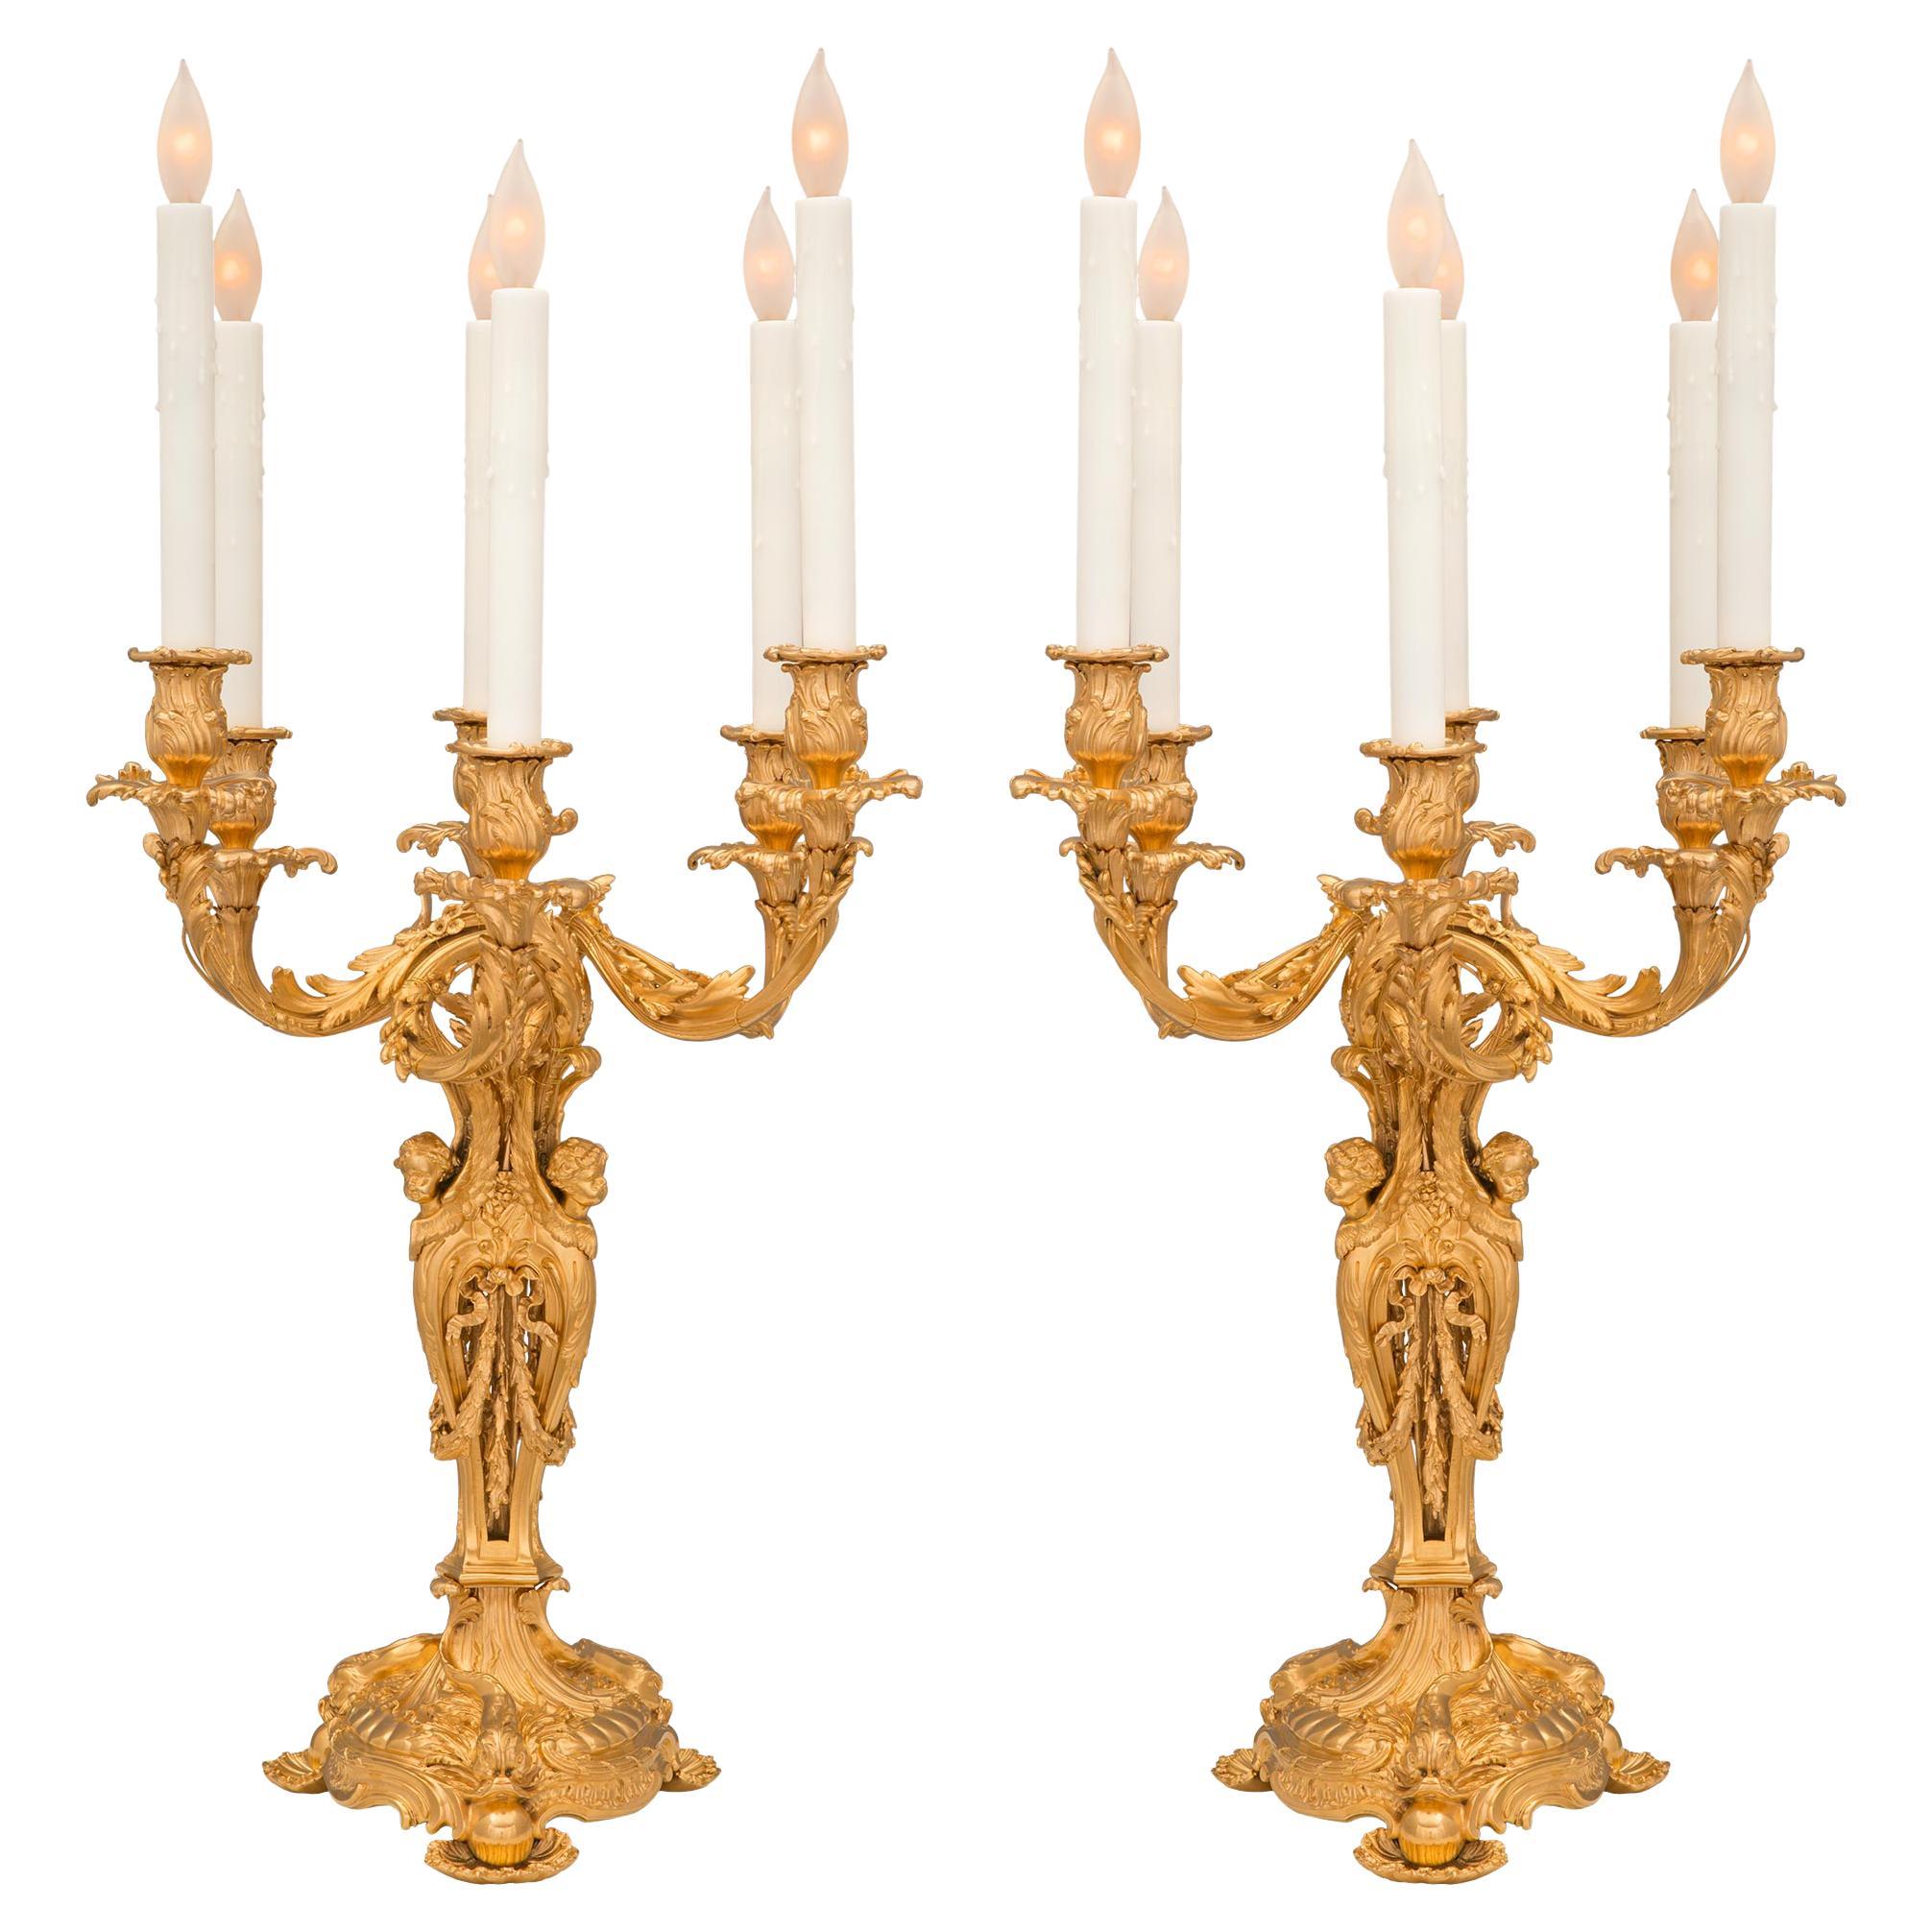 An exceptional and very high quality pair of French 19th century Louis XV st. ormolu candelabra lamps attributed to François Linke. Each six arm lamp is raised by a striking wonderfully executed scrolled foliate circular base with unique ball and